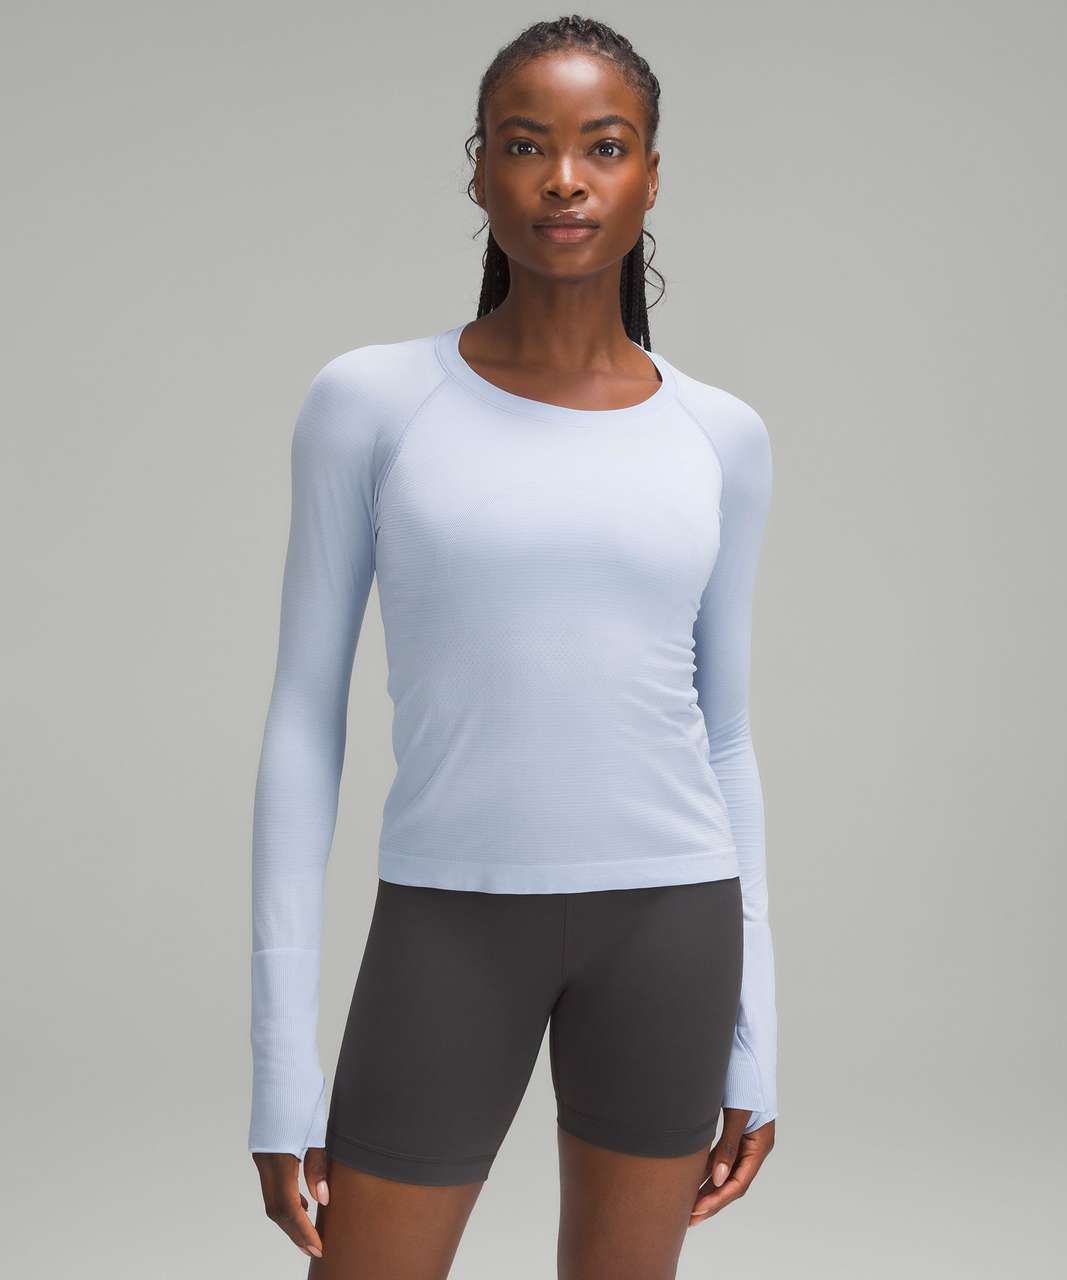 Blue linen swiftly tech race (size 2) and navy aligns (size 2) : r/lululemon